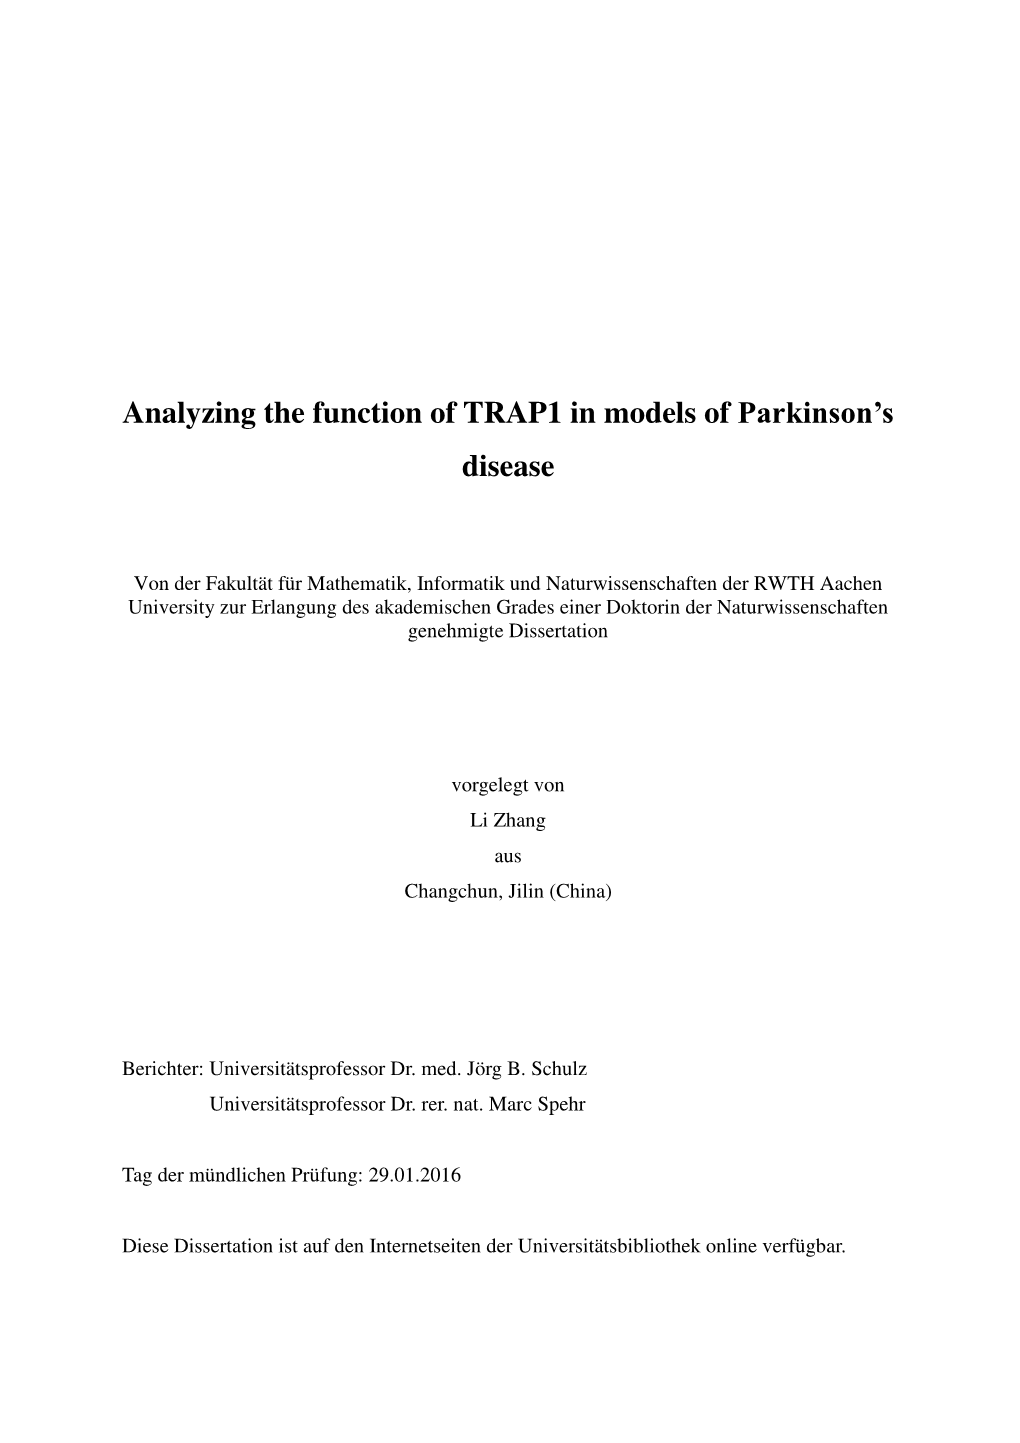 Analyzing the Function of TRAP1 in Models of Parkinson's Disease